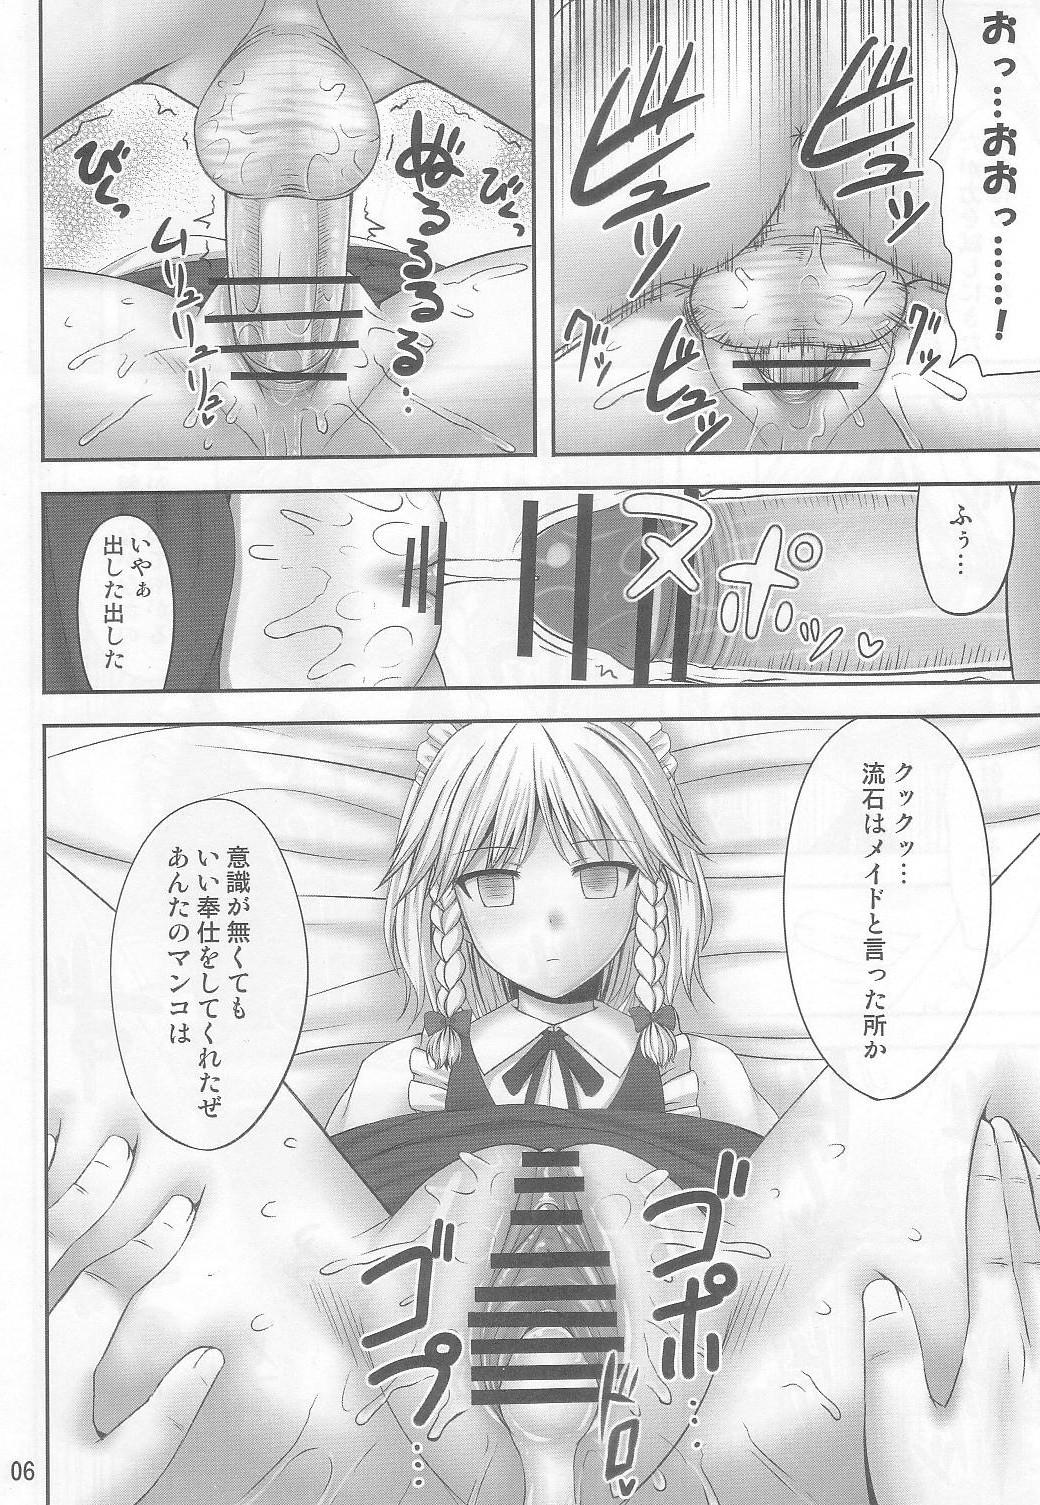 Old Vs Young Gensou Saimin 2 - Touhou project Freeporn - Page 6